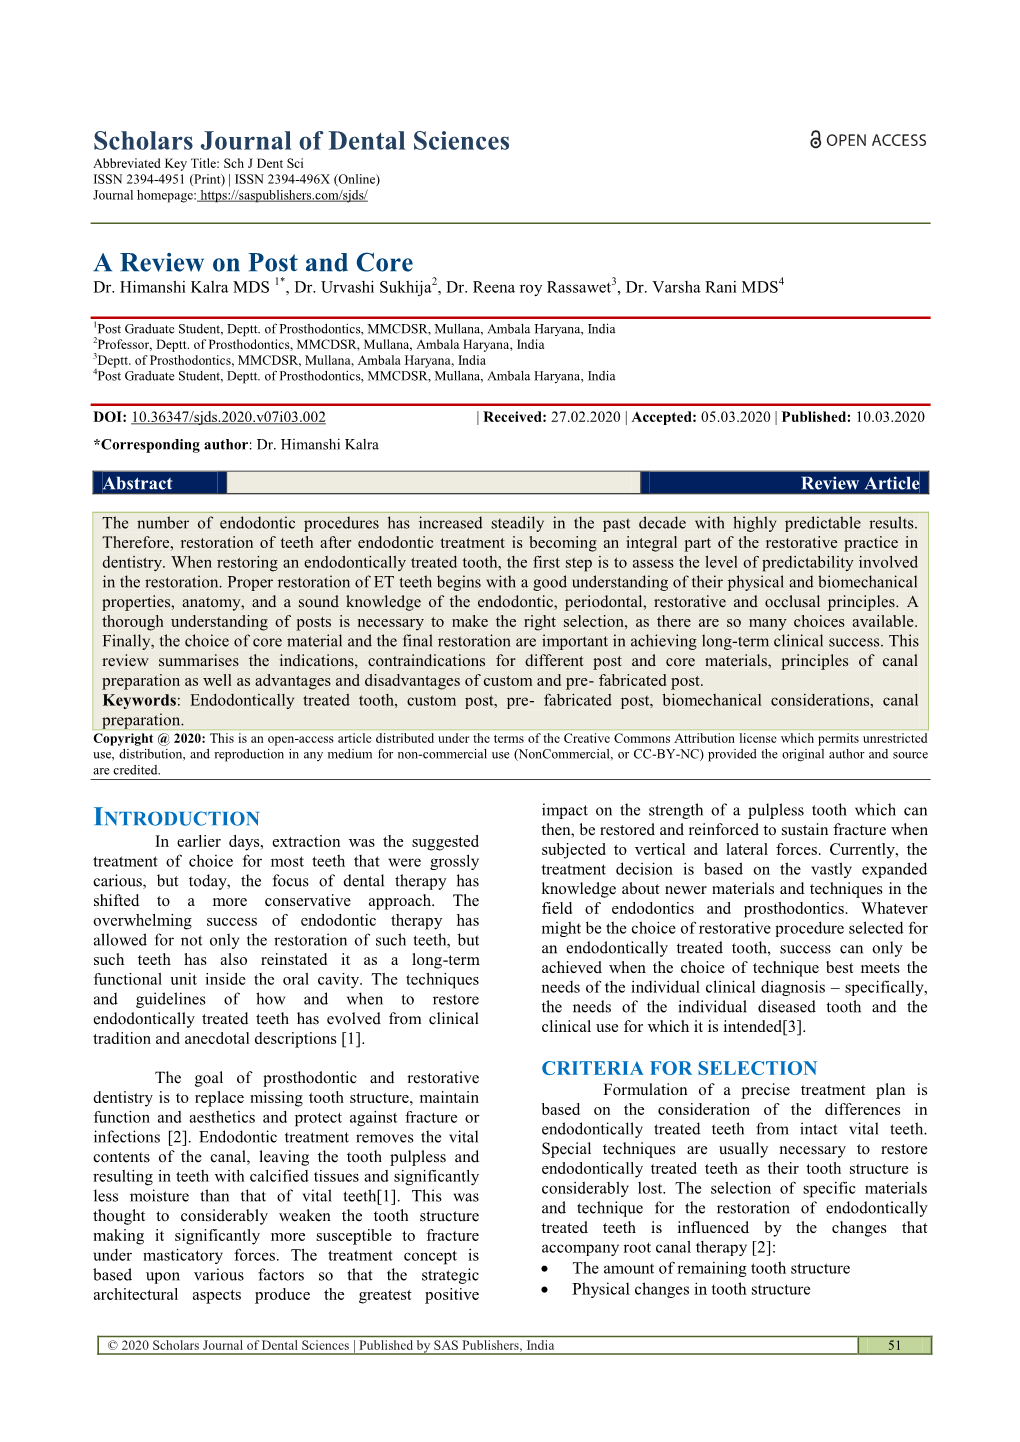 Scholars Journal of Dental Sciences a Review on Post and Core